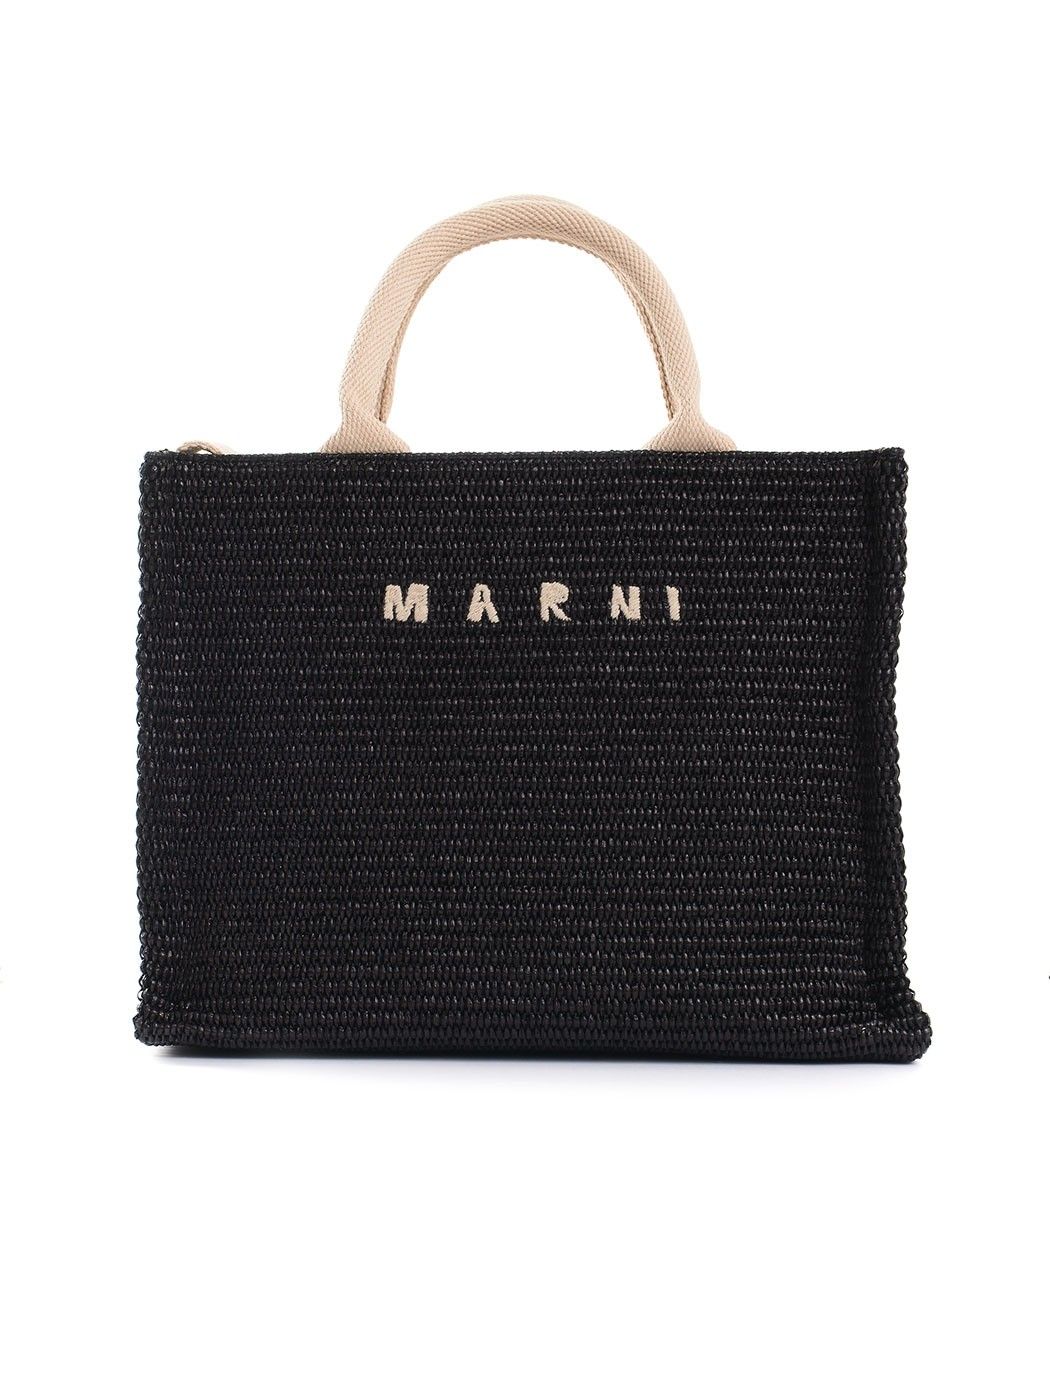  WOMAN BAGS,SPRING SUMMER COLLECTION,GIVENCHY BAGS,MARNI BAGS,LES PETITS JOUEURS BAGS  MARNI SHMP0077U0